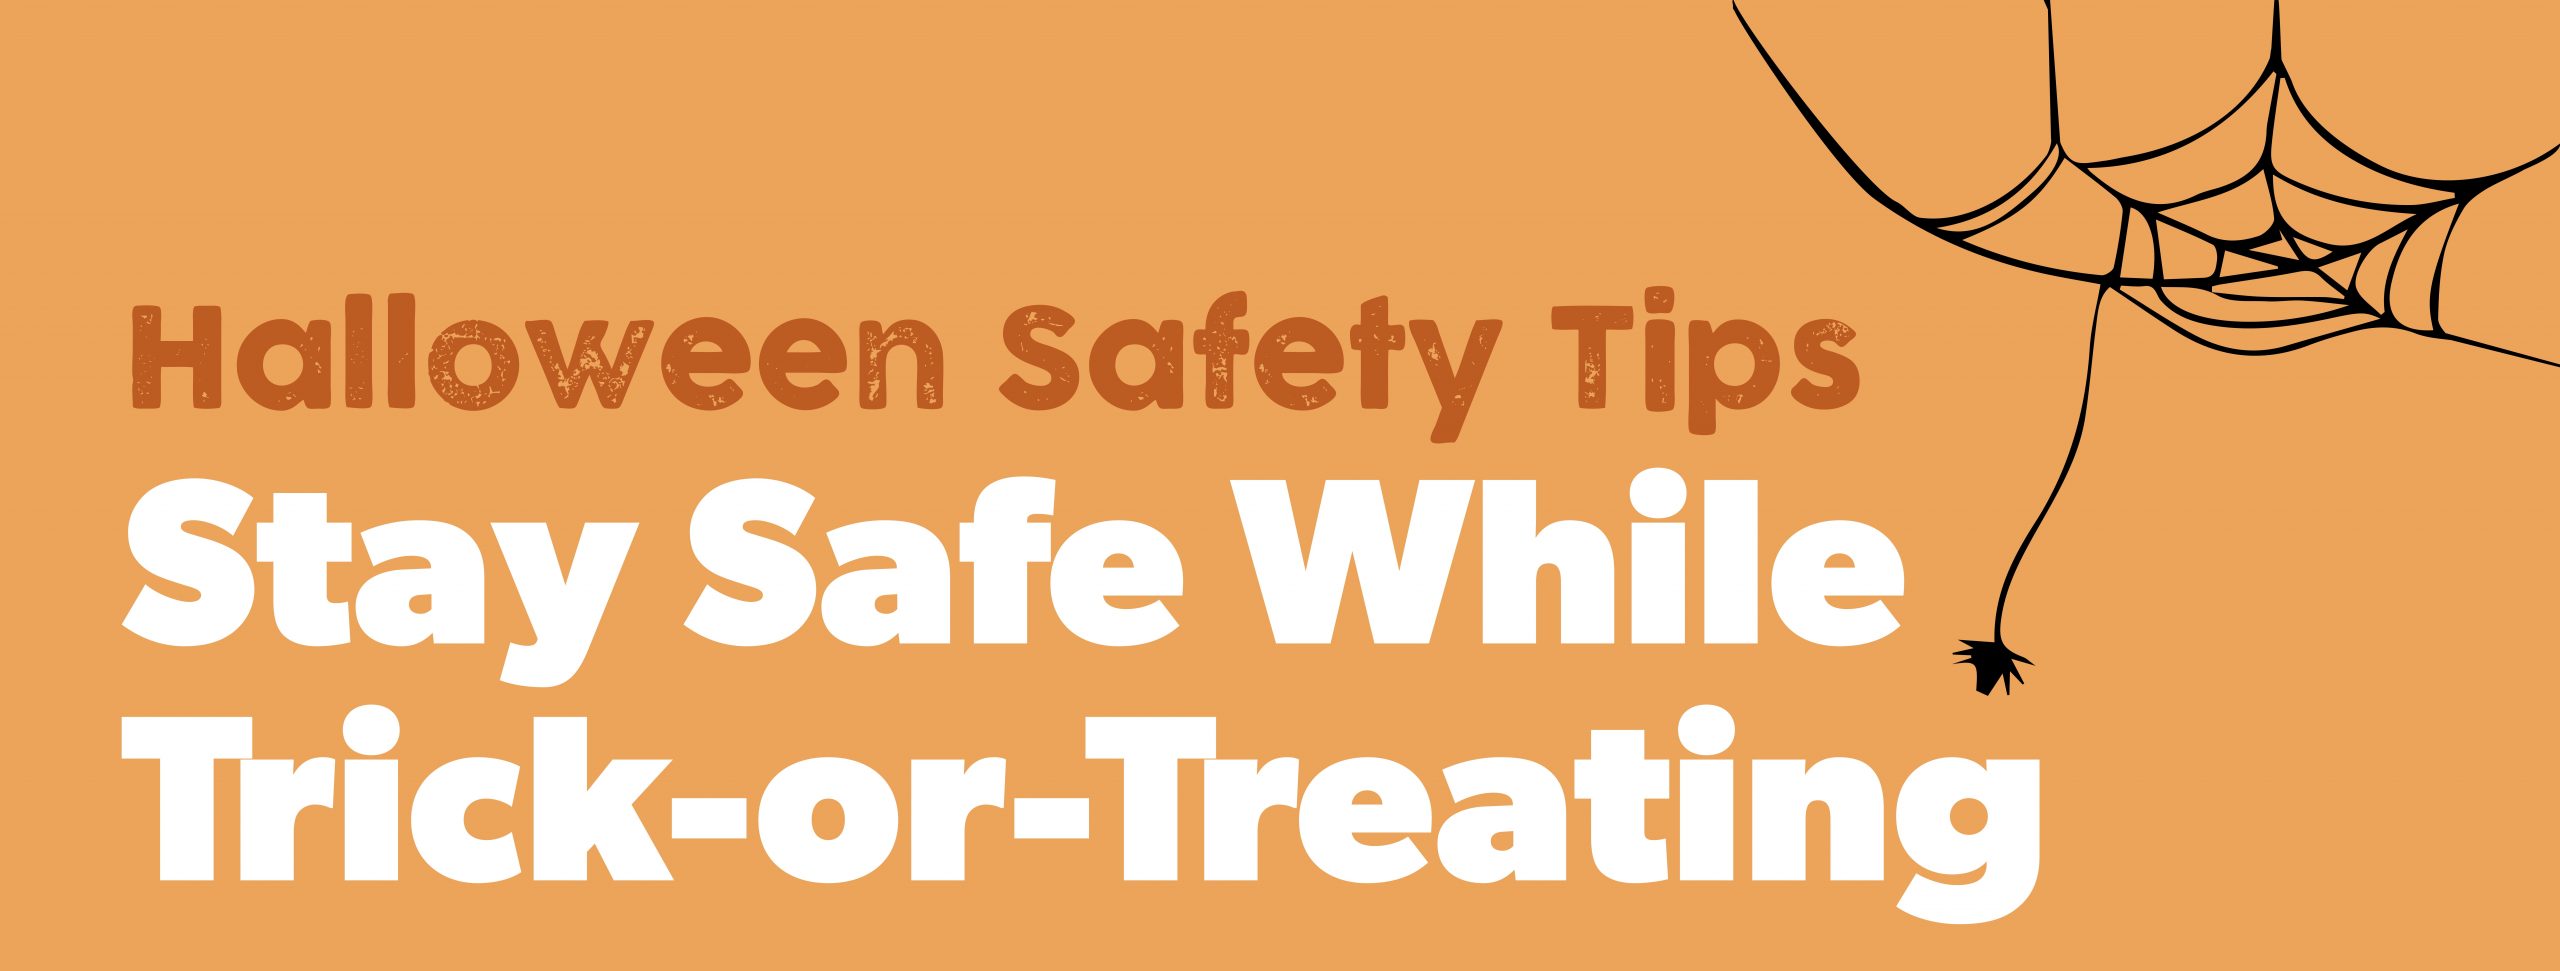 Halloween safety: staying safe while trick-or-treating